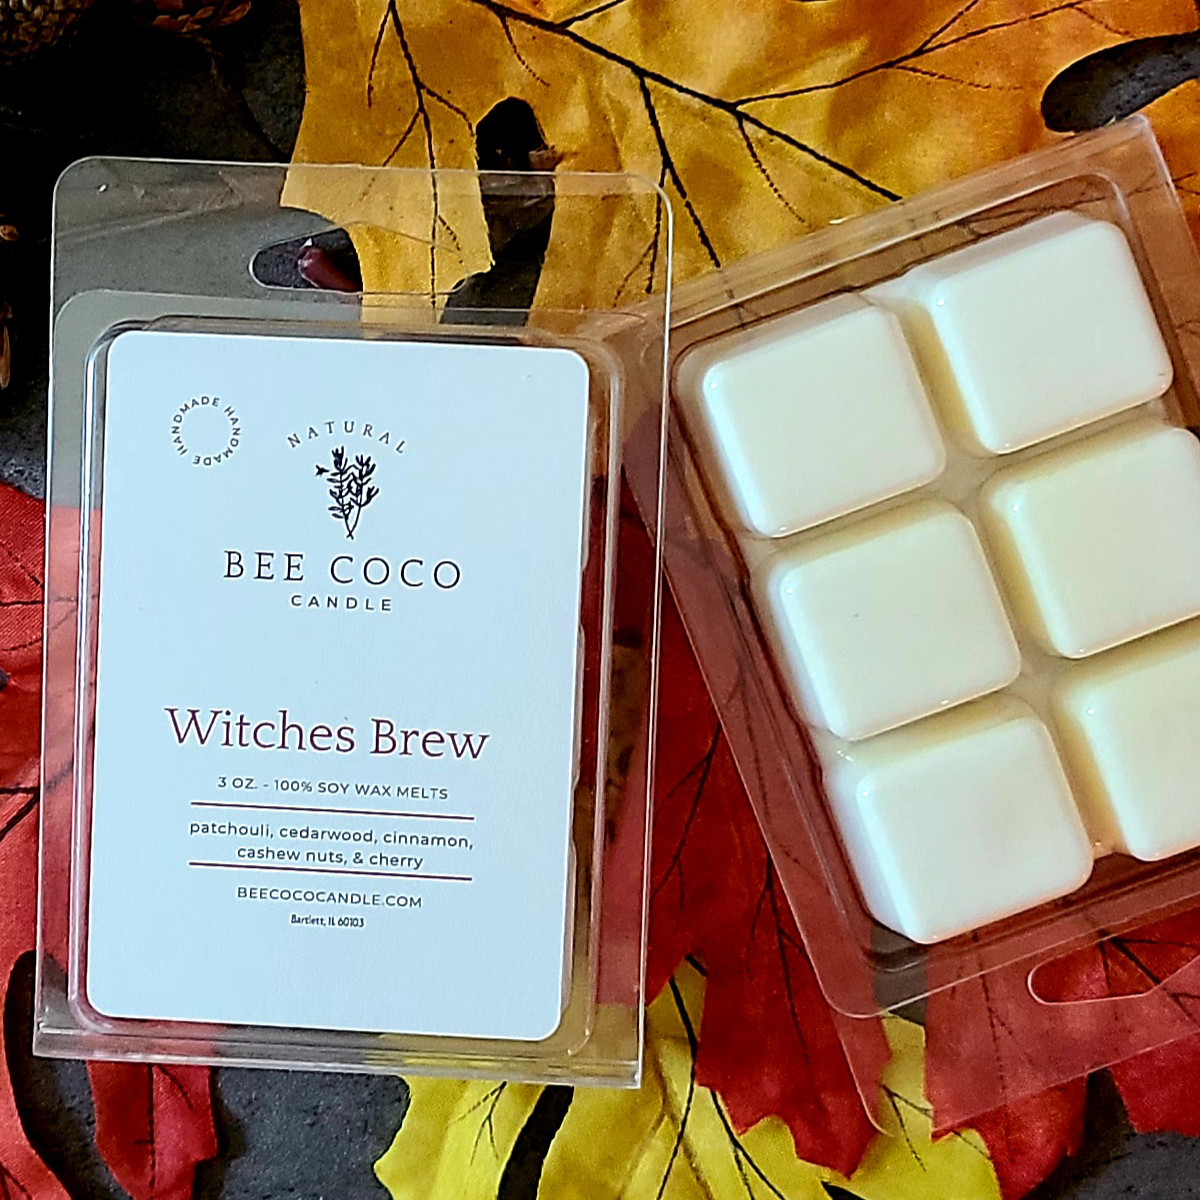 Candles vs Wax Melts: Why Scented Soy Wax Melts Are Better